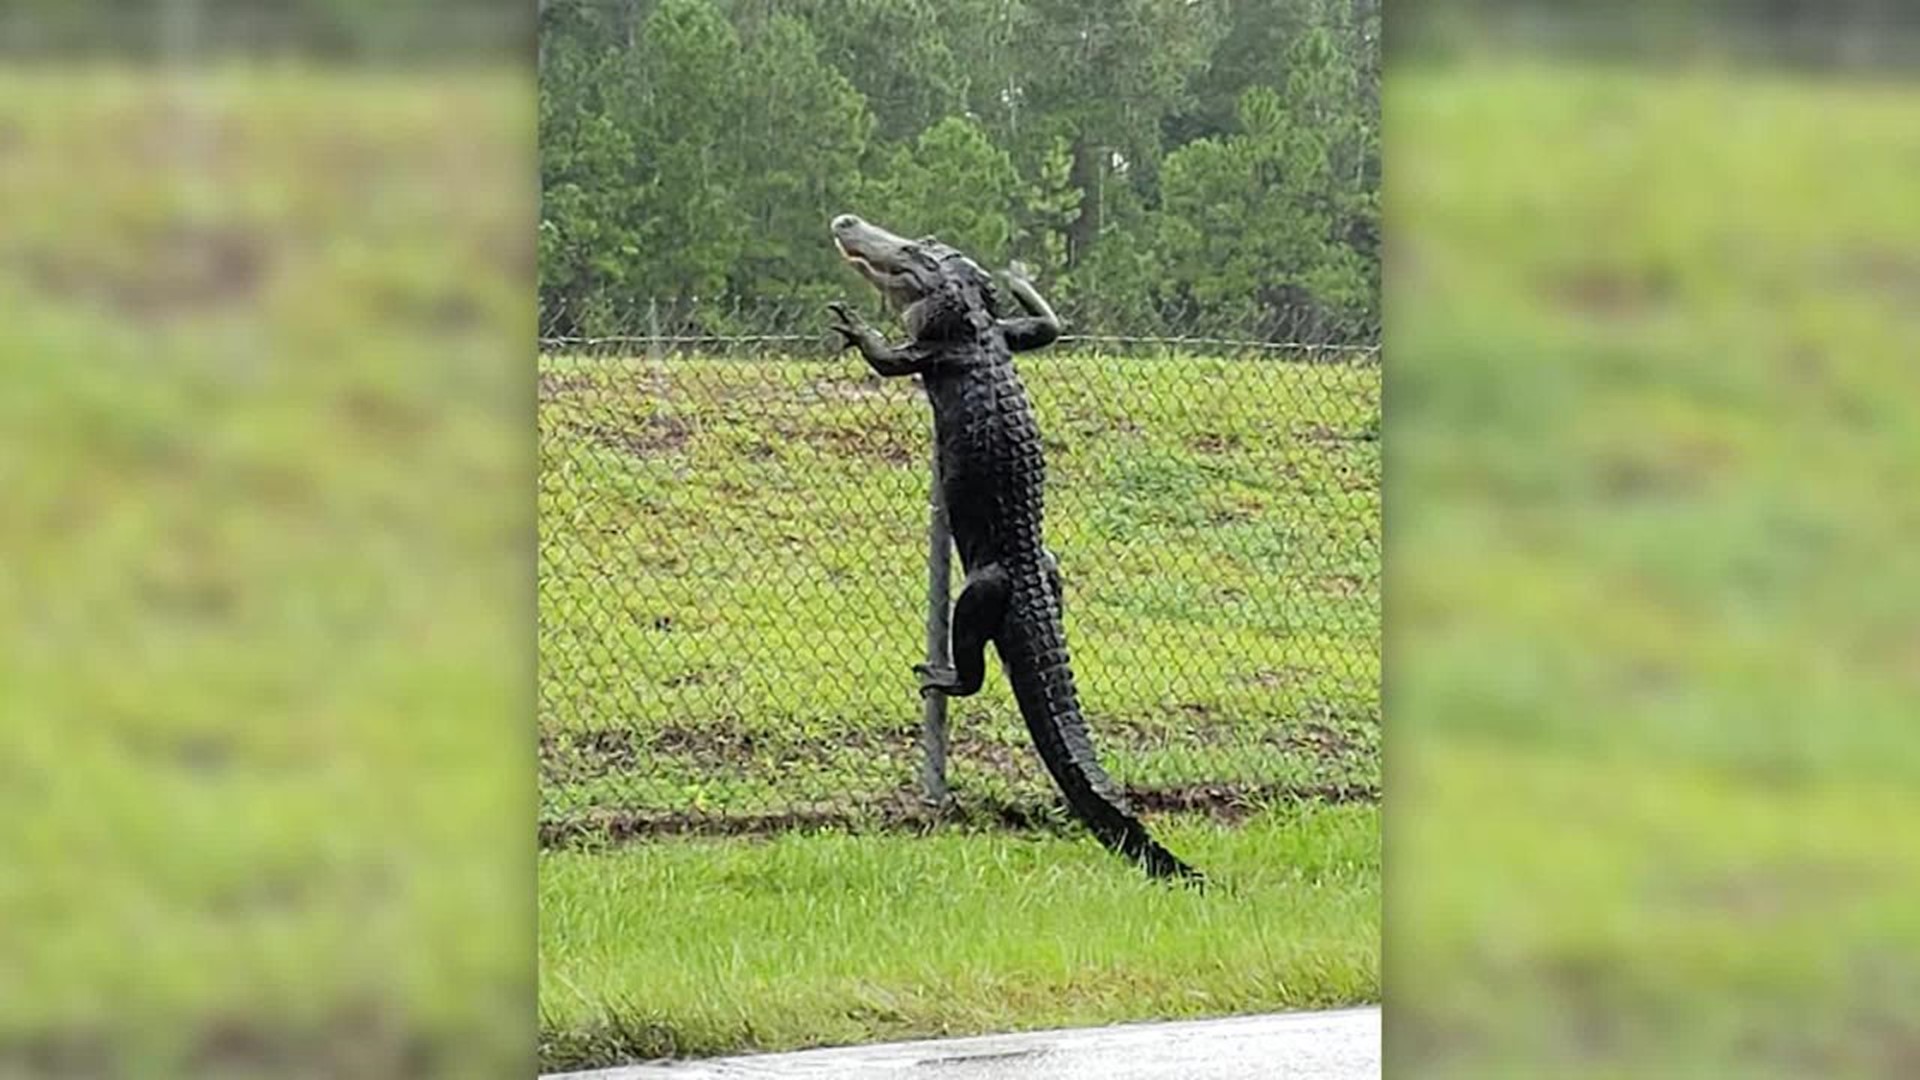 Alligator climbs fence in Florida 